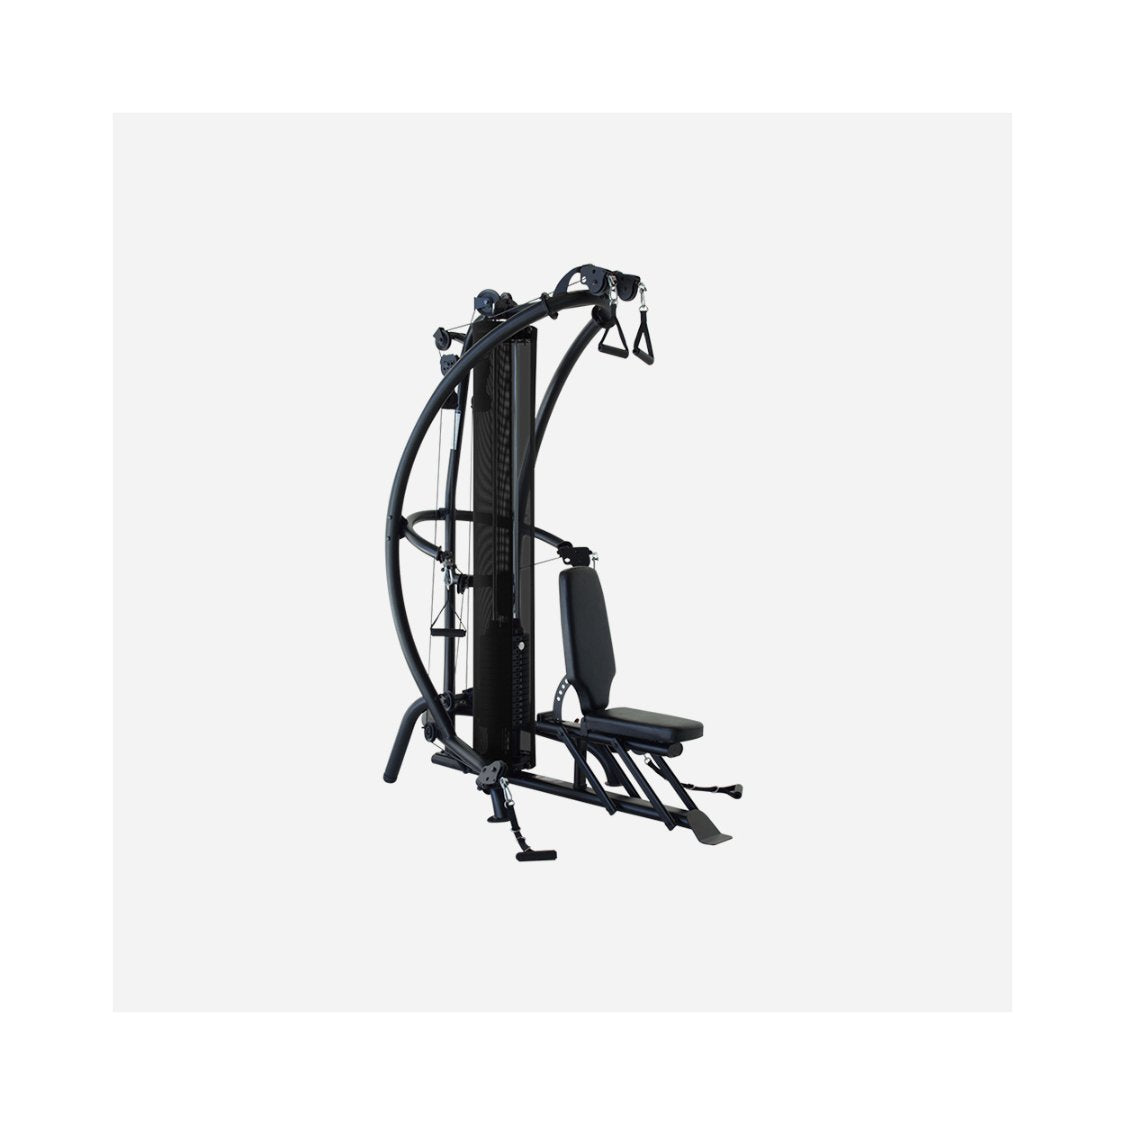 New Residential Strength Equipment - ExerciseUnlimited